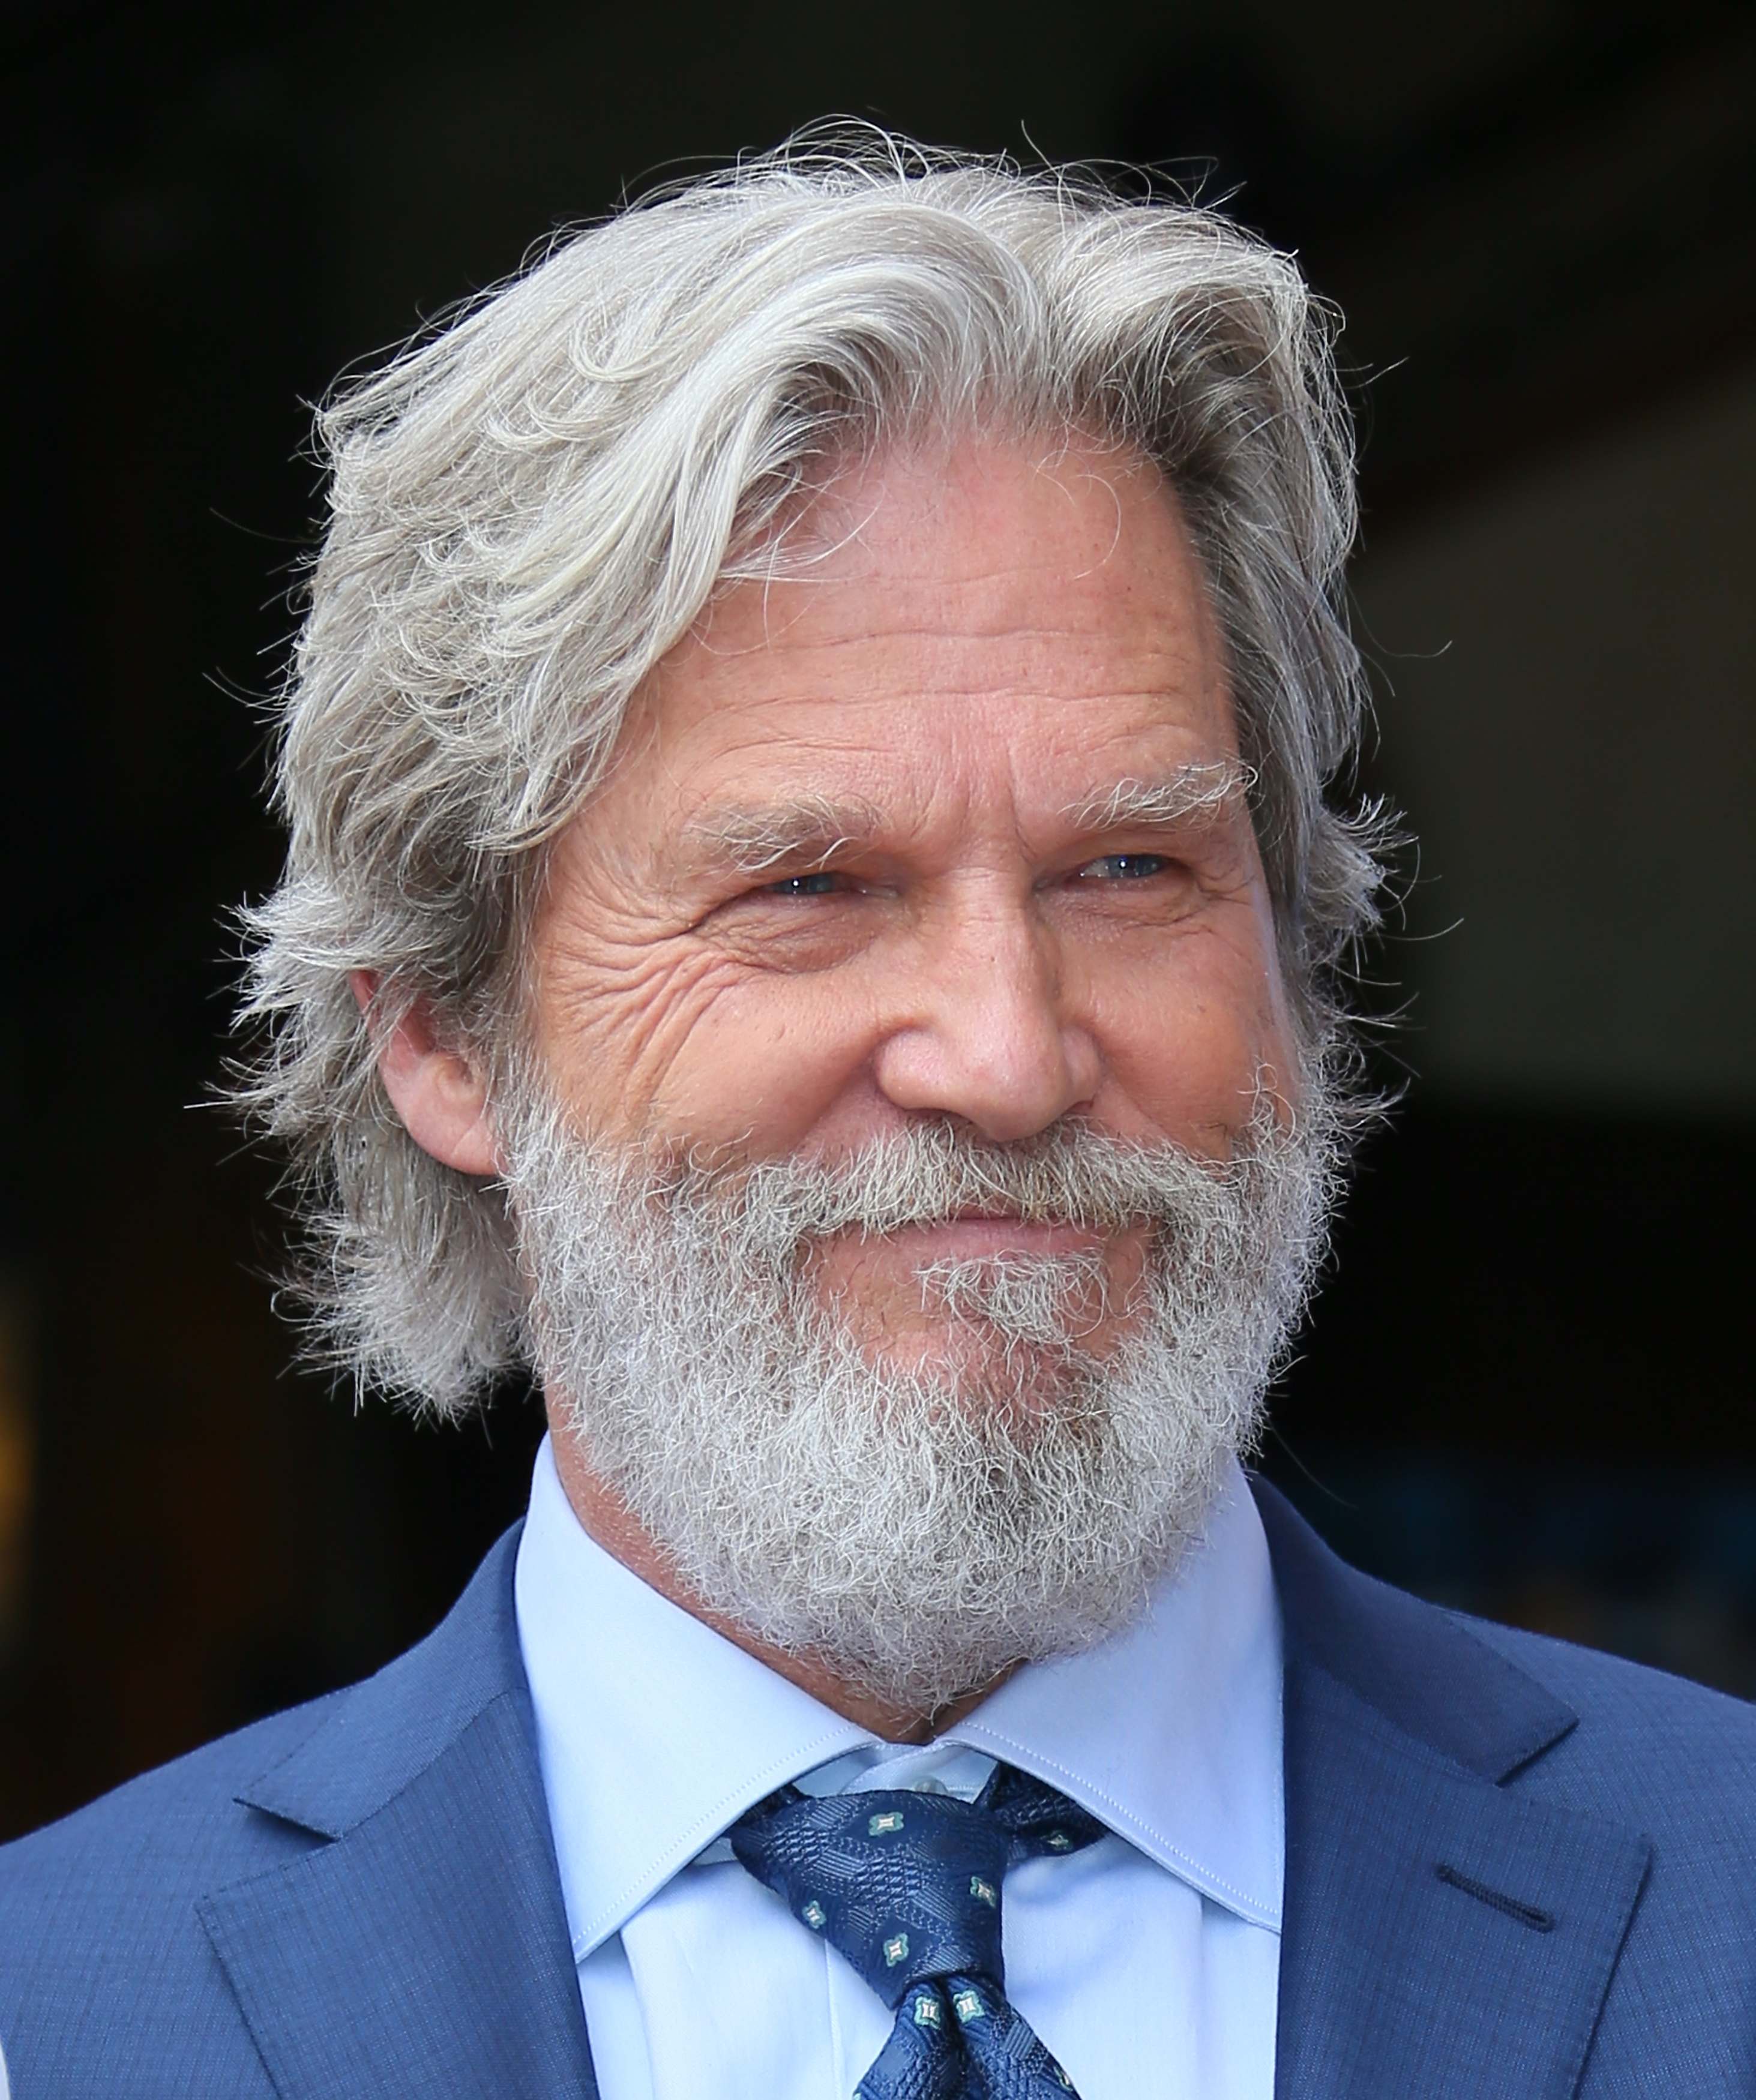 Jeff Bridges attends a ceremony honoring John Goodman with the 2,604th Star on The Hollywood Walk of Fame in Hollywood, California on March 10, 2017. | Source: Getty Images